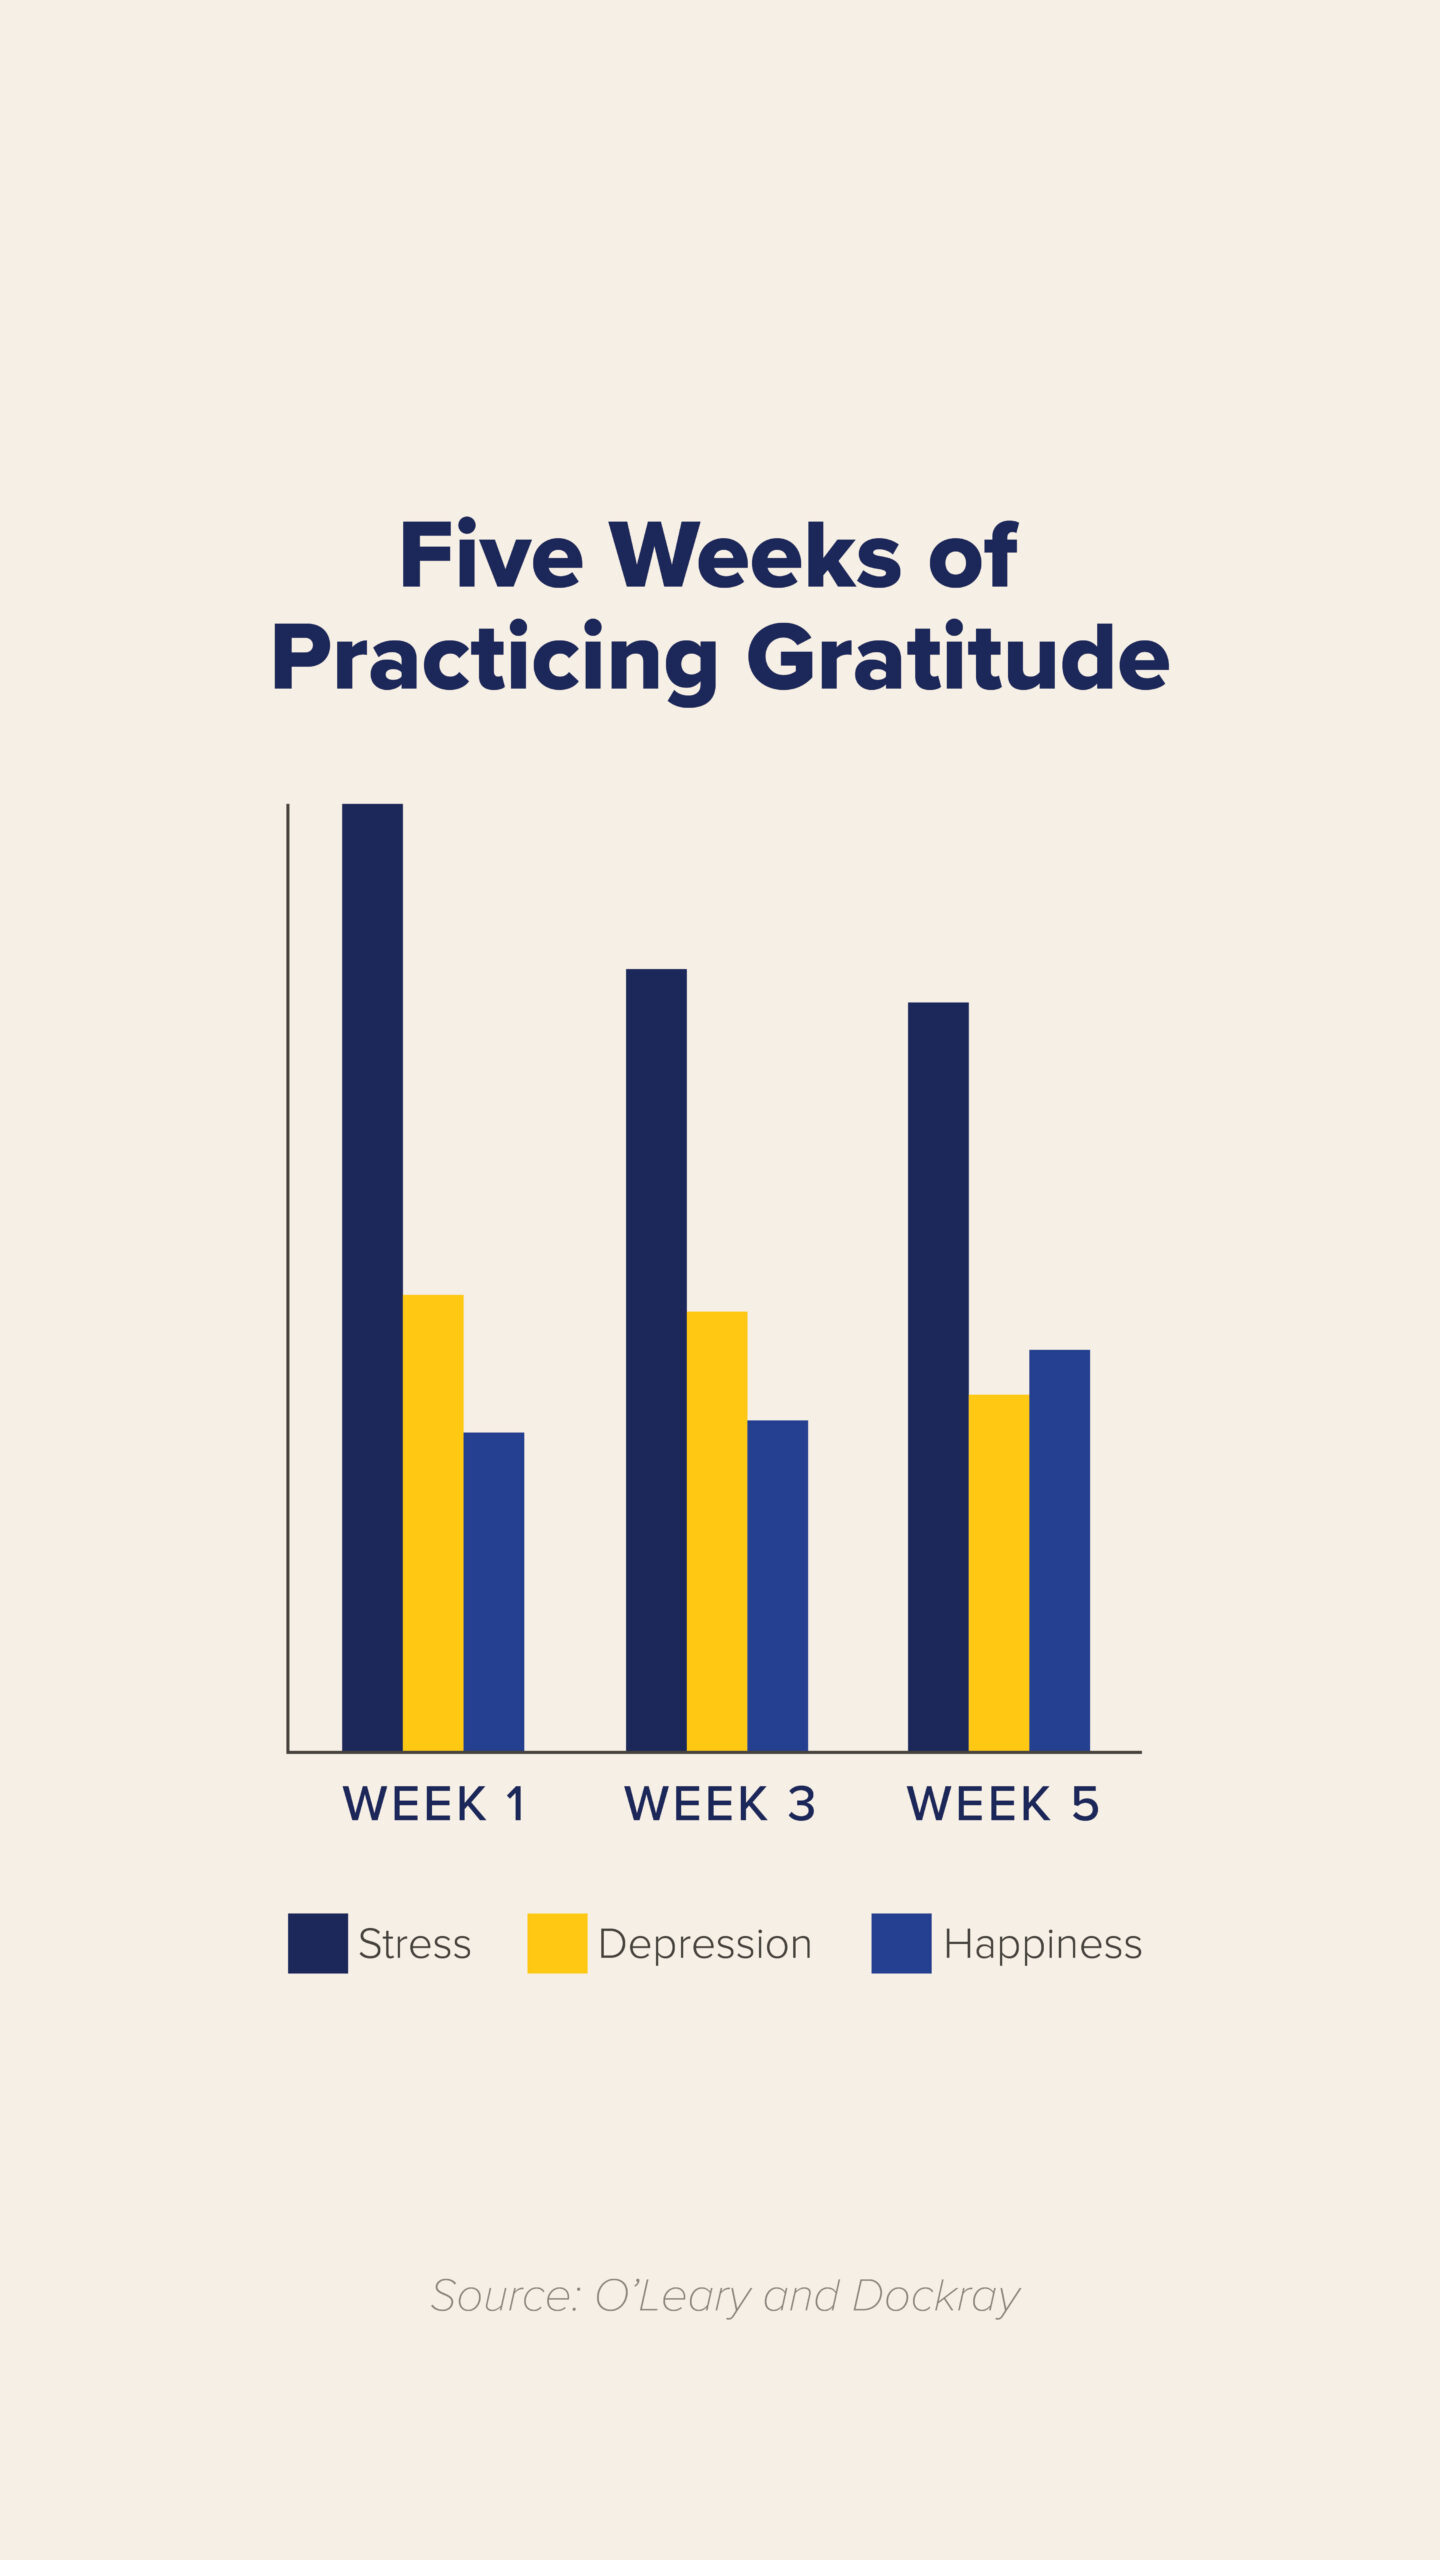 Five Weeks of Praticing Gratitude with a bar graph graphics